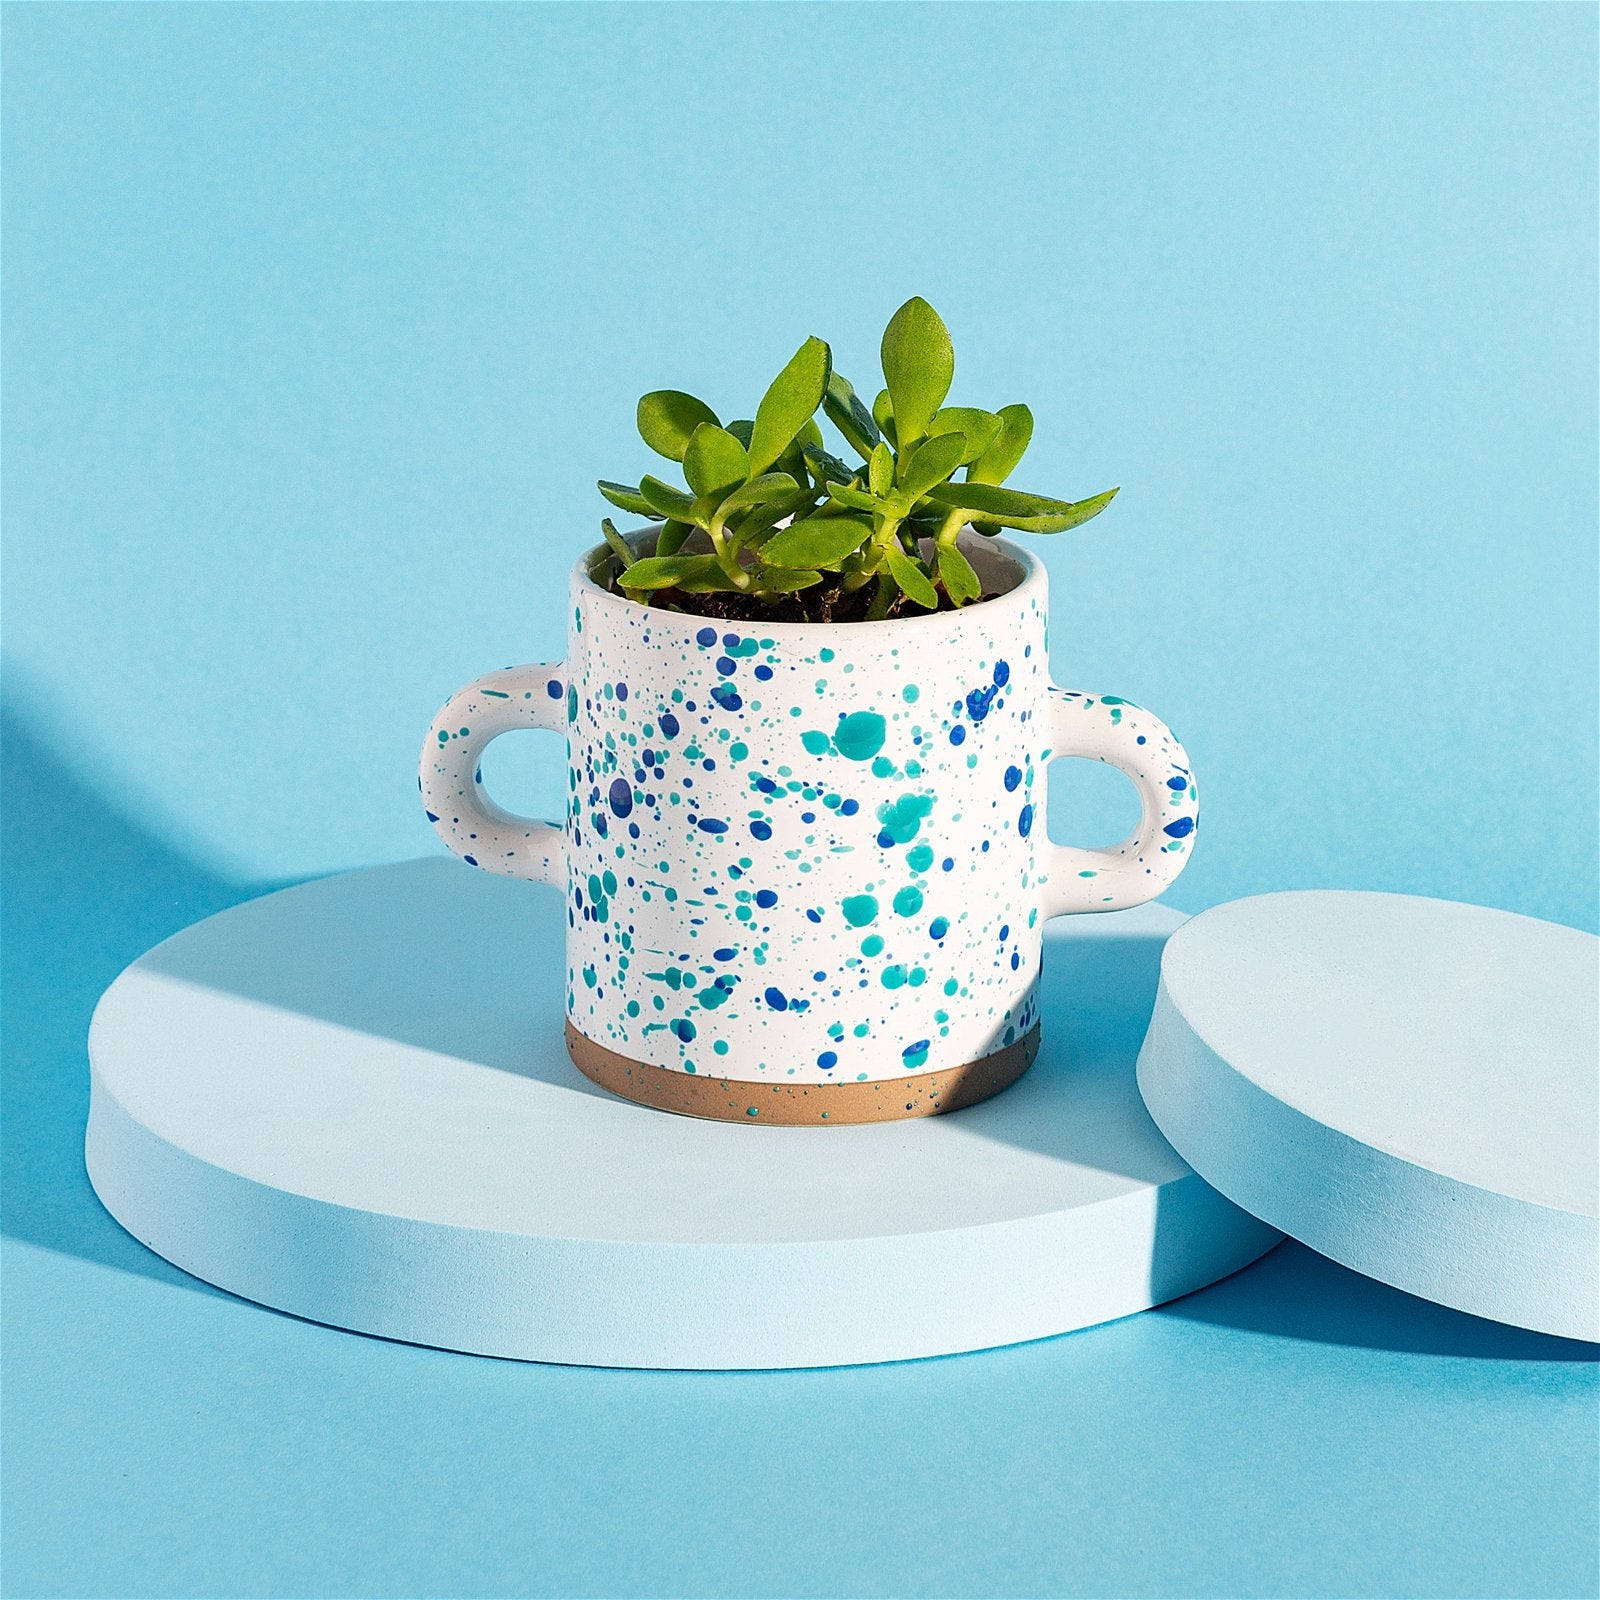 Turquoise and Blue Splatterware Planter - a Cheeky Plant